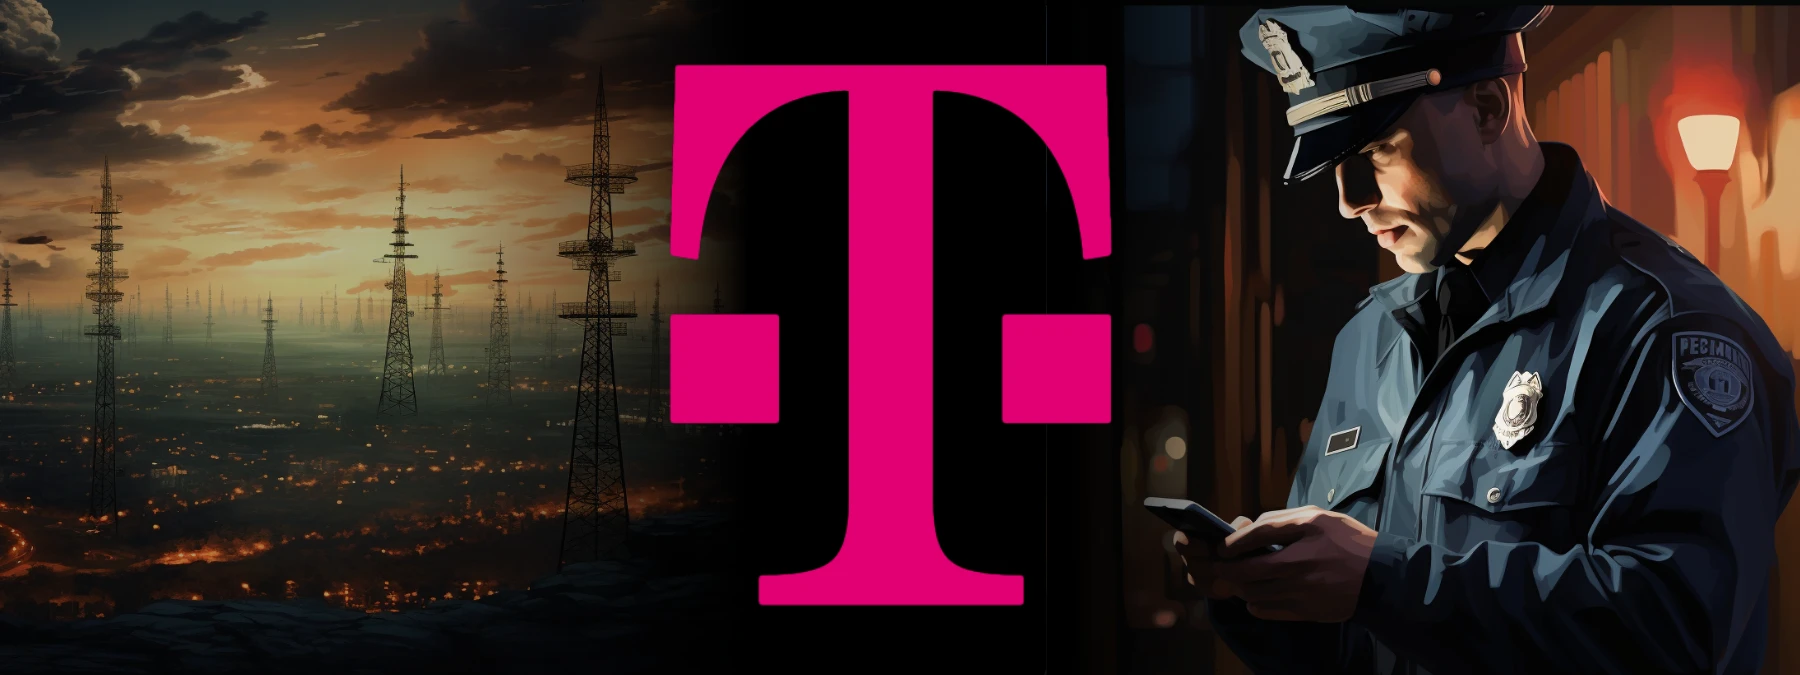 Featured image for “Writing T-Mobile Search Warrants”